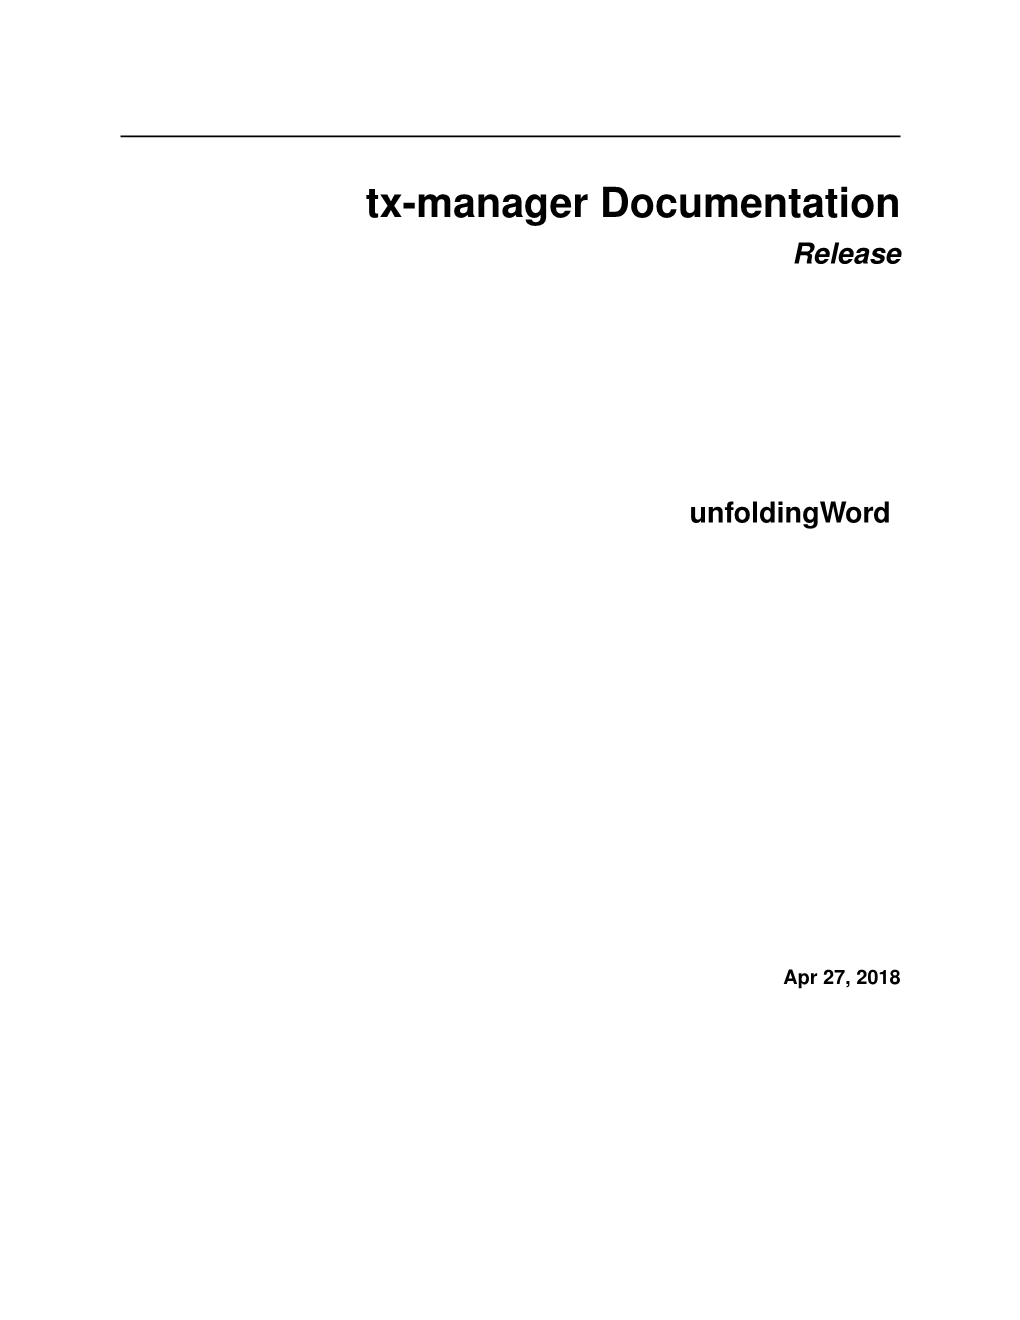 Tx-Manager Documentation Release